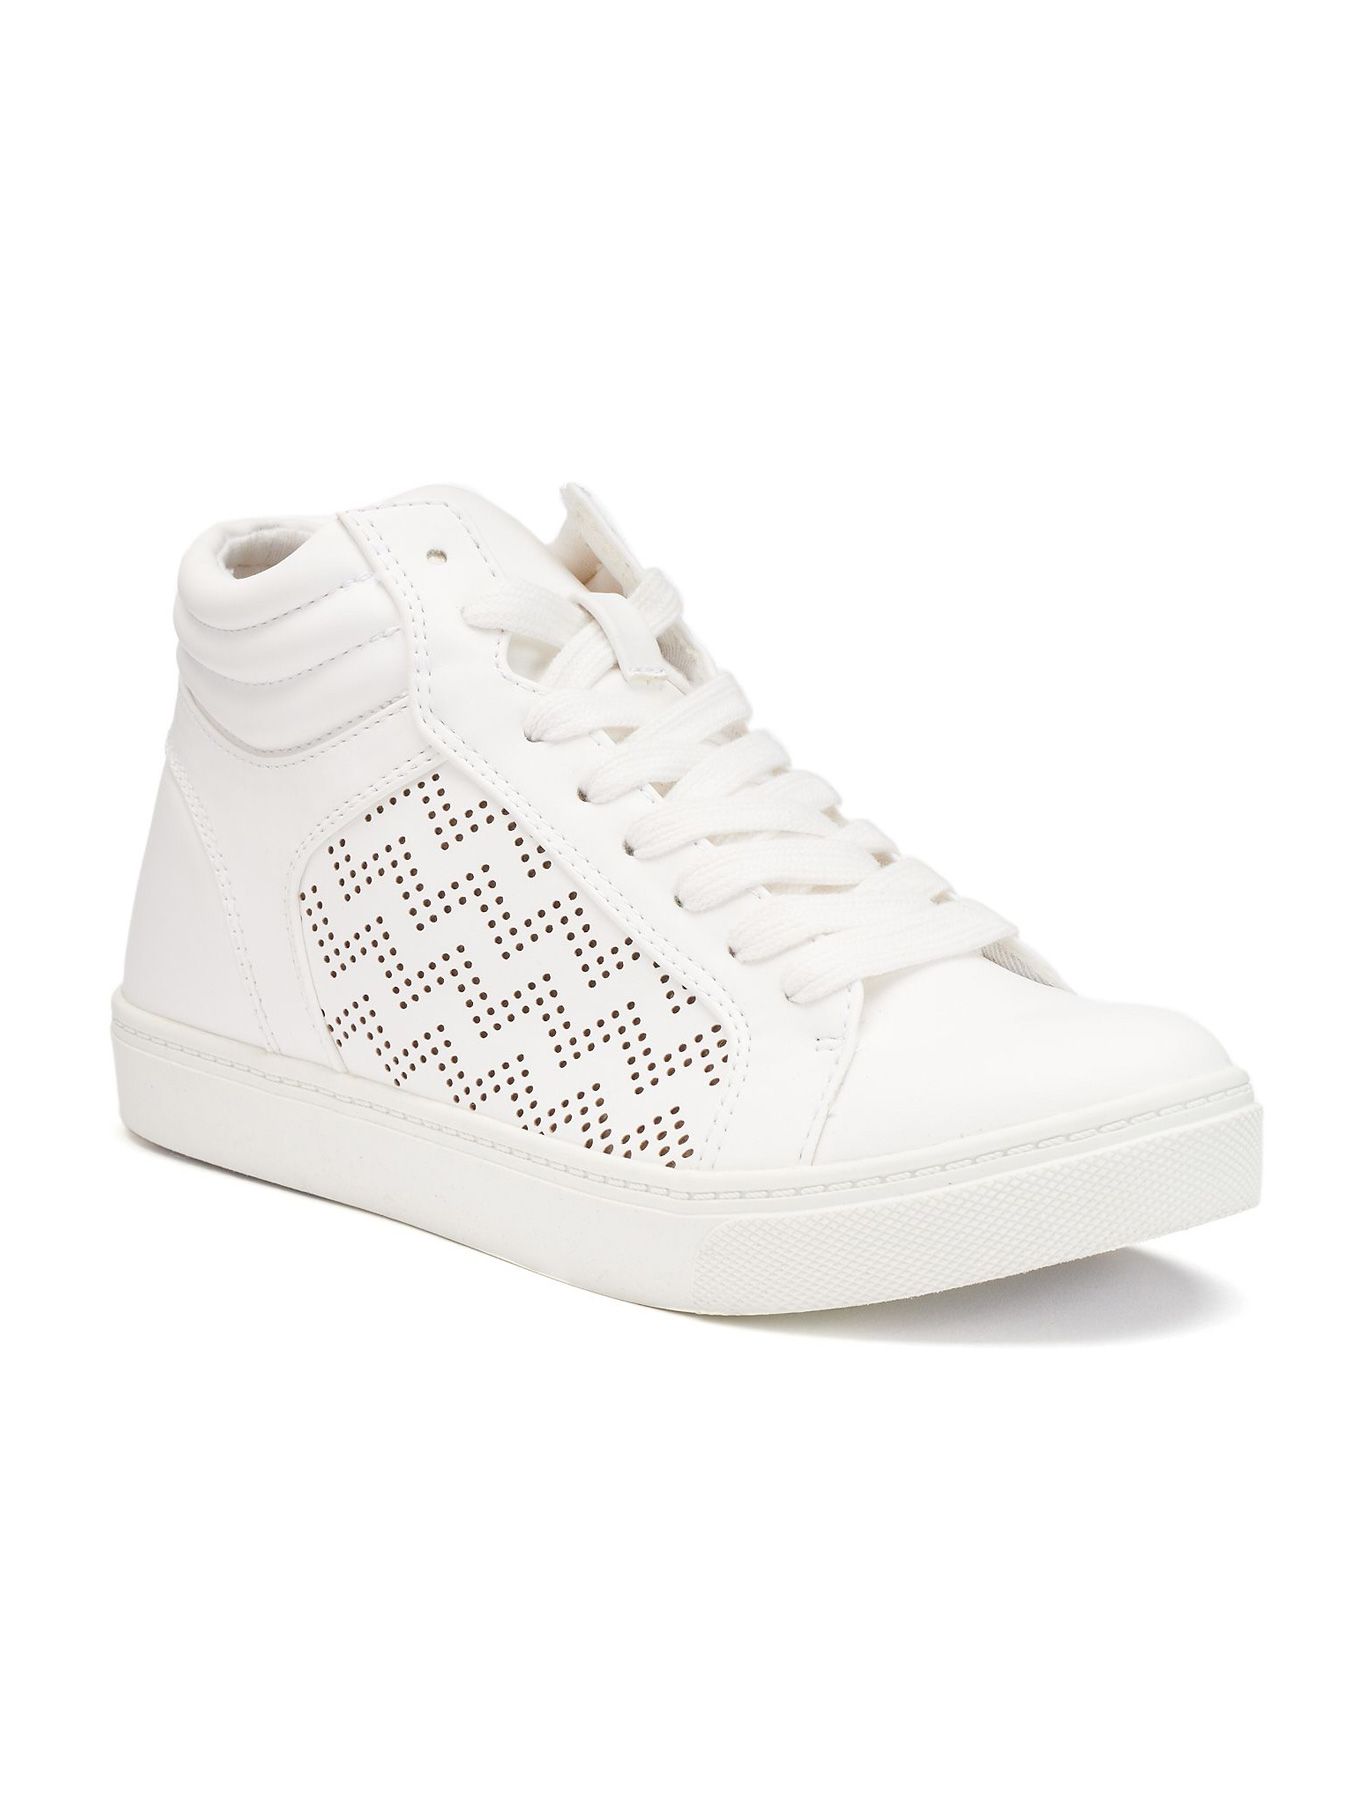 SO for Kohl's Women's Perforated High-Top Sneakers